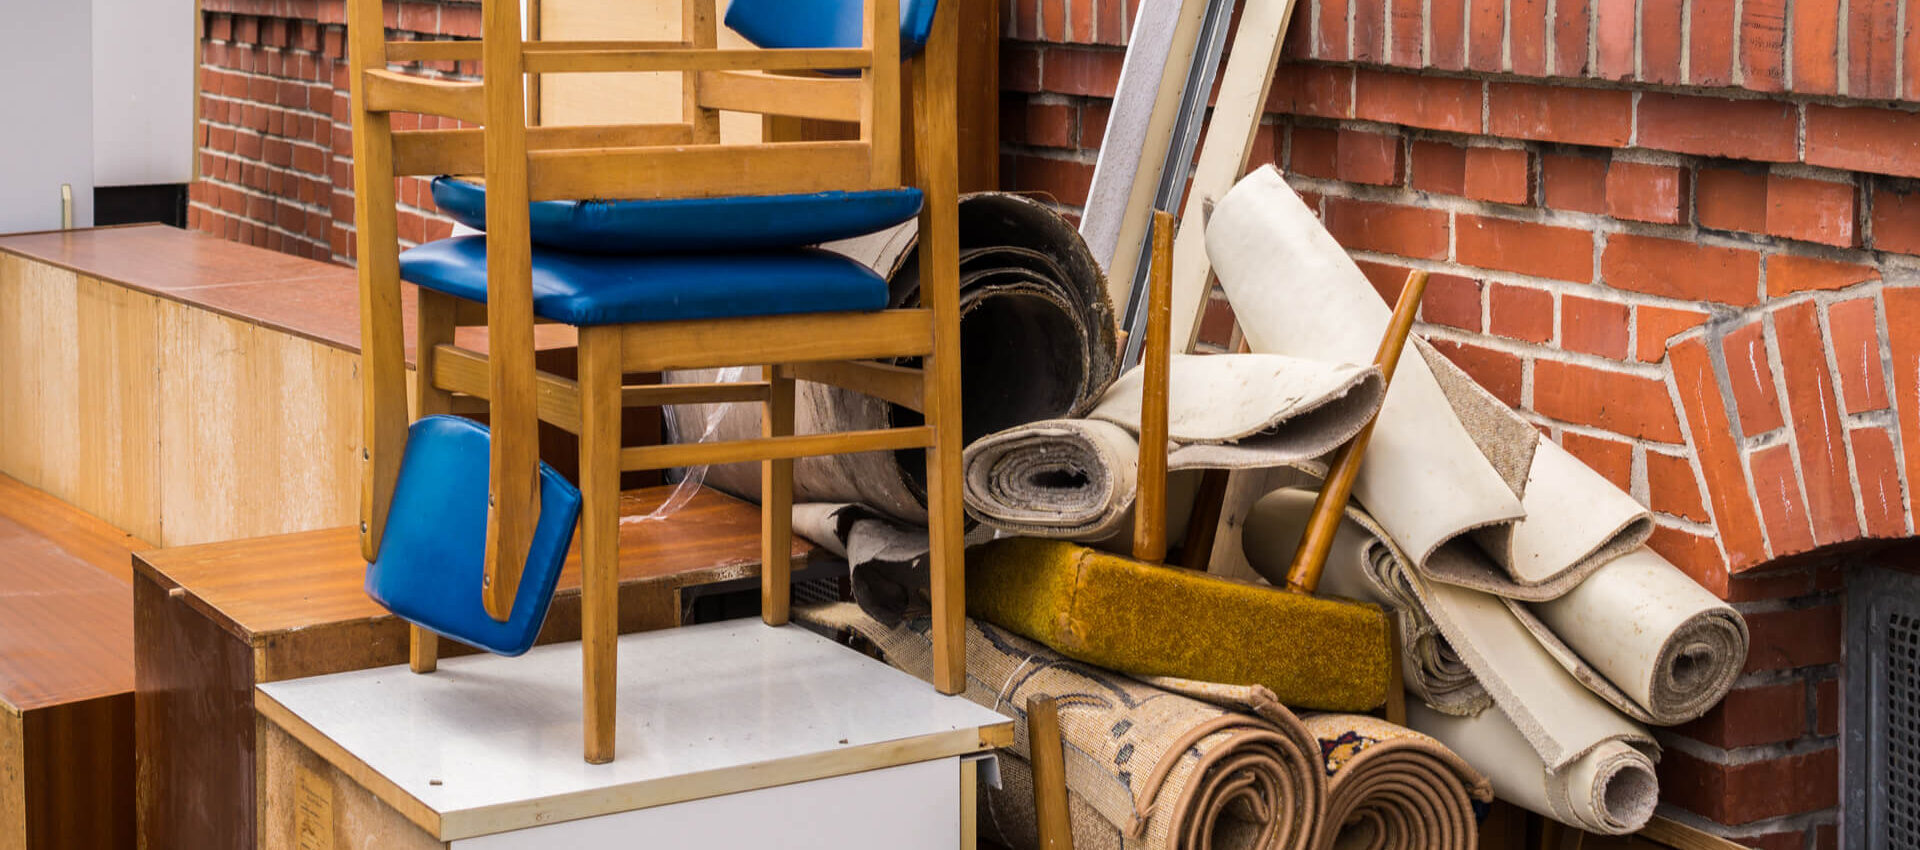 How to Get Rid of Old or Unwanted Furniture the Right Way